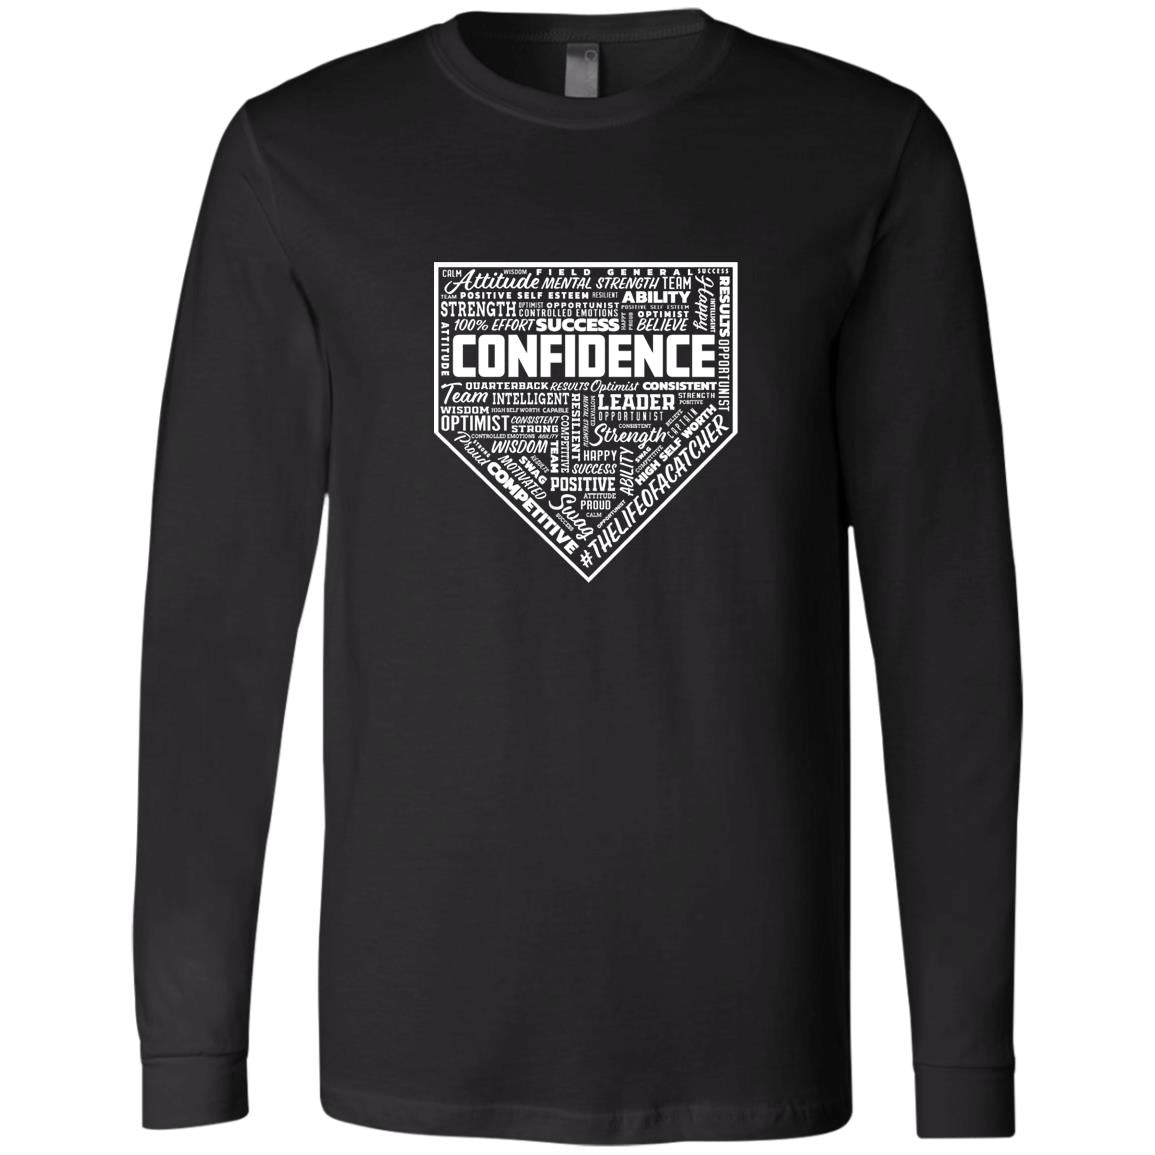 The Catching Guy Catcher Confidence Jersey Tee in black